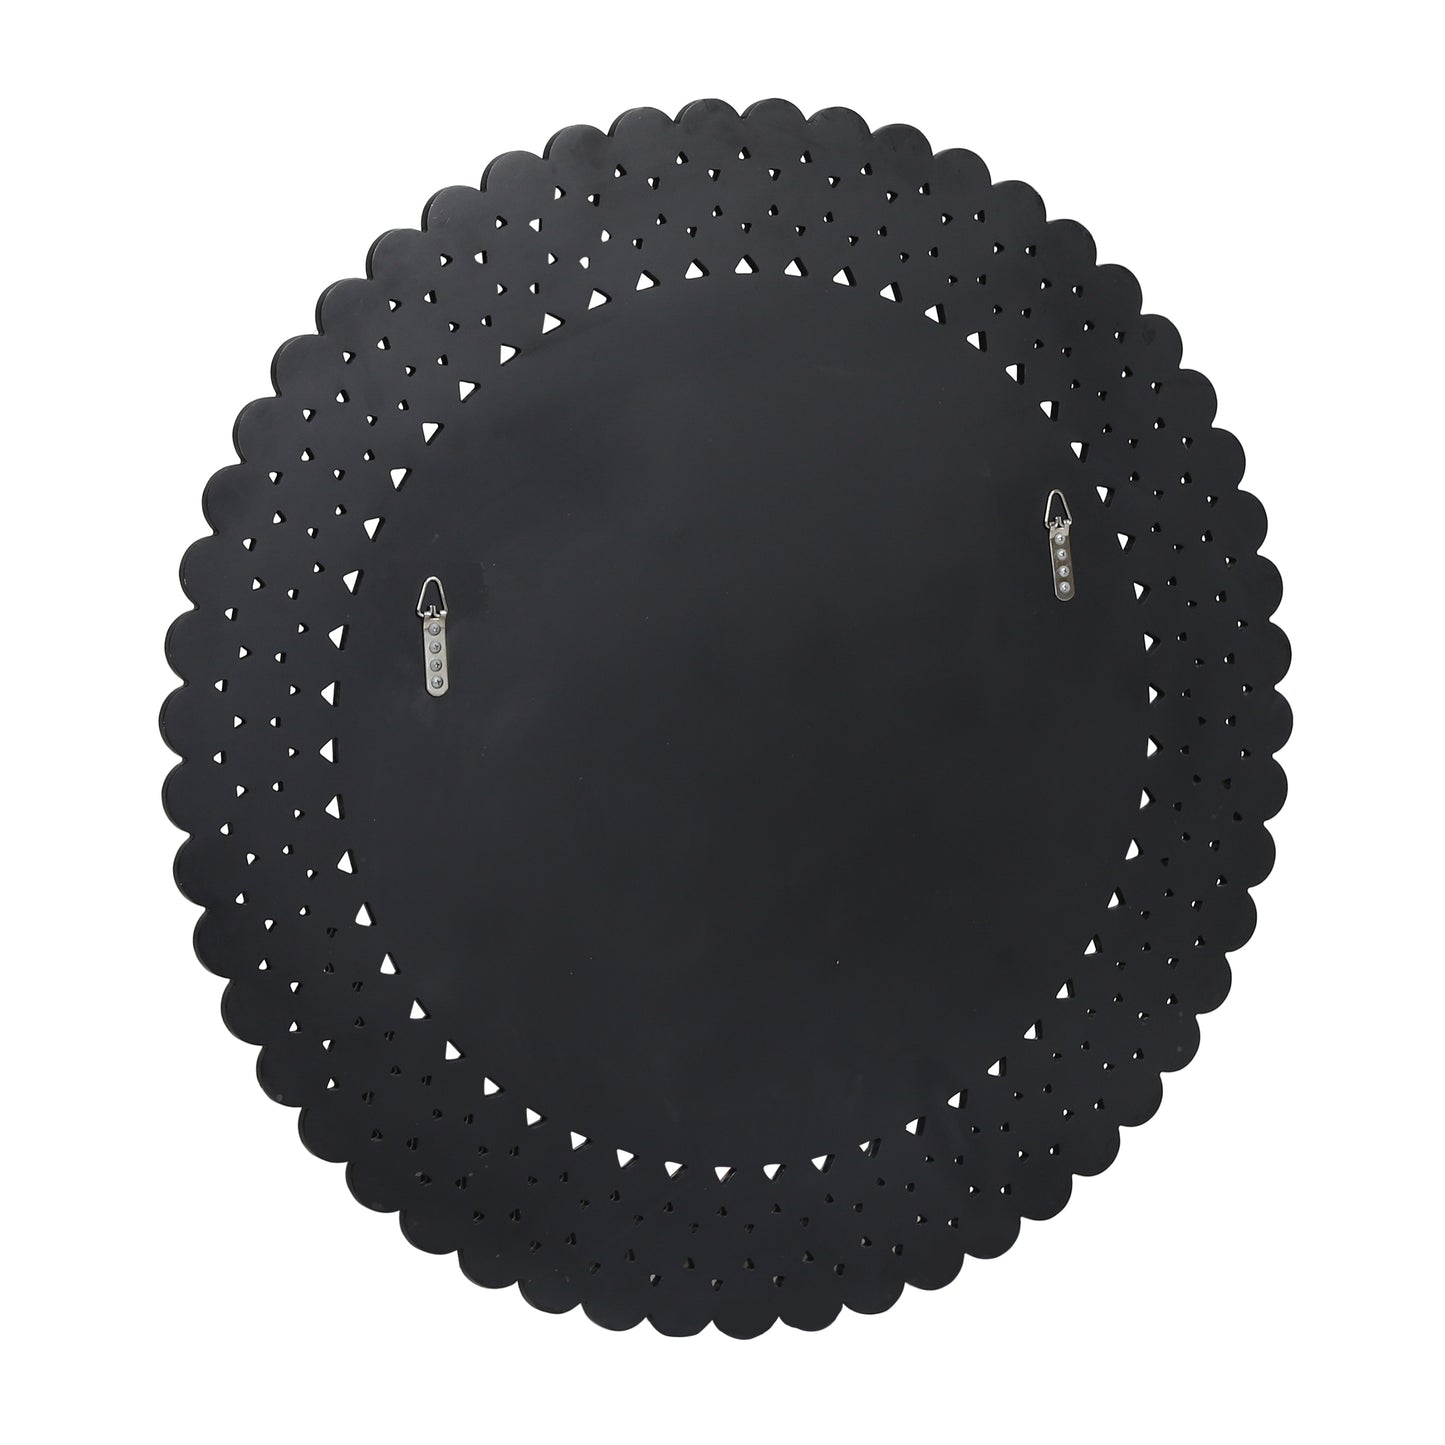 Abels Contemporary Studded Round Wall Mirror